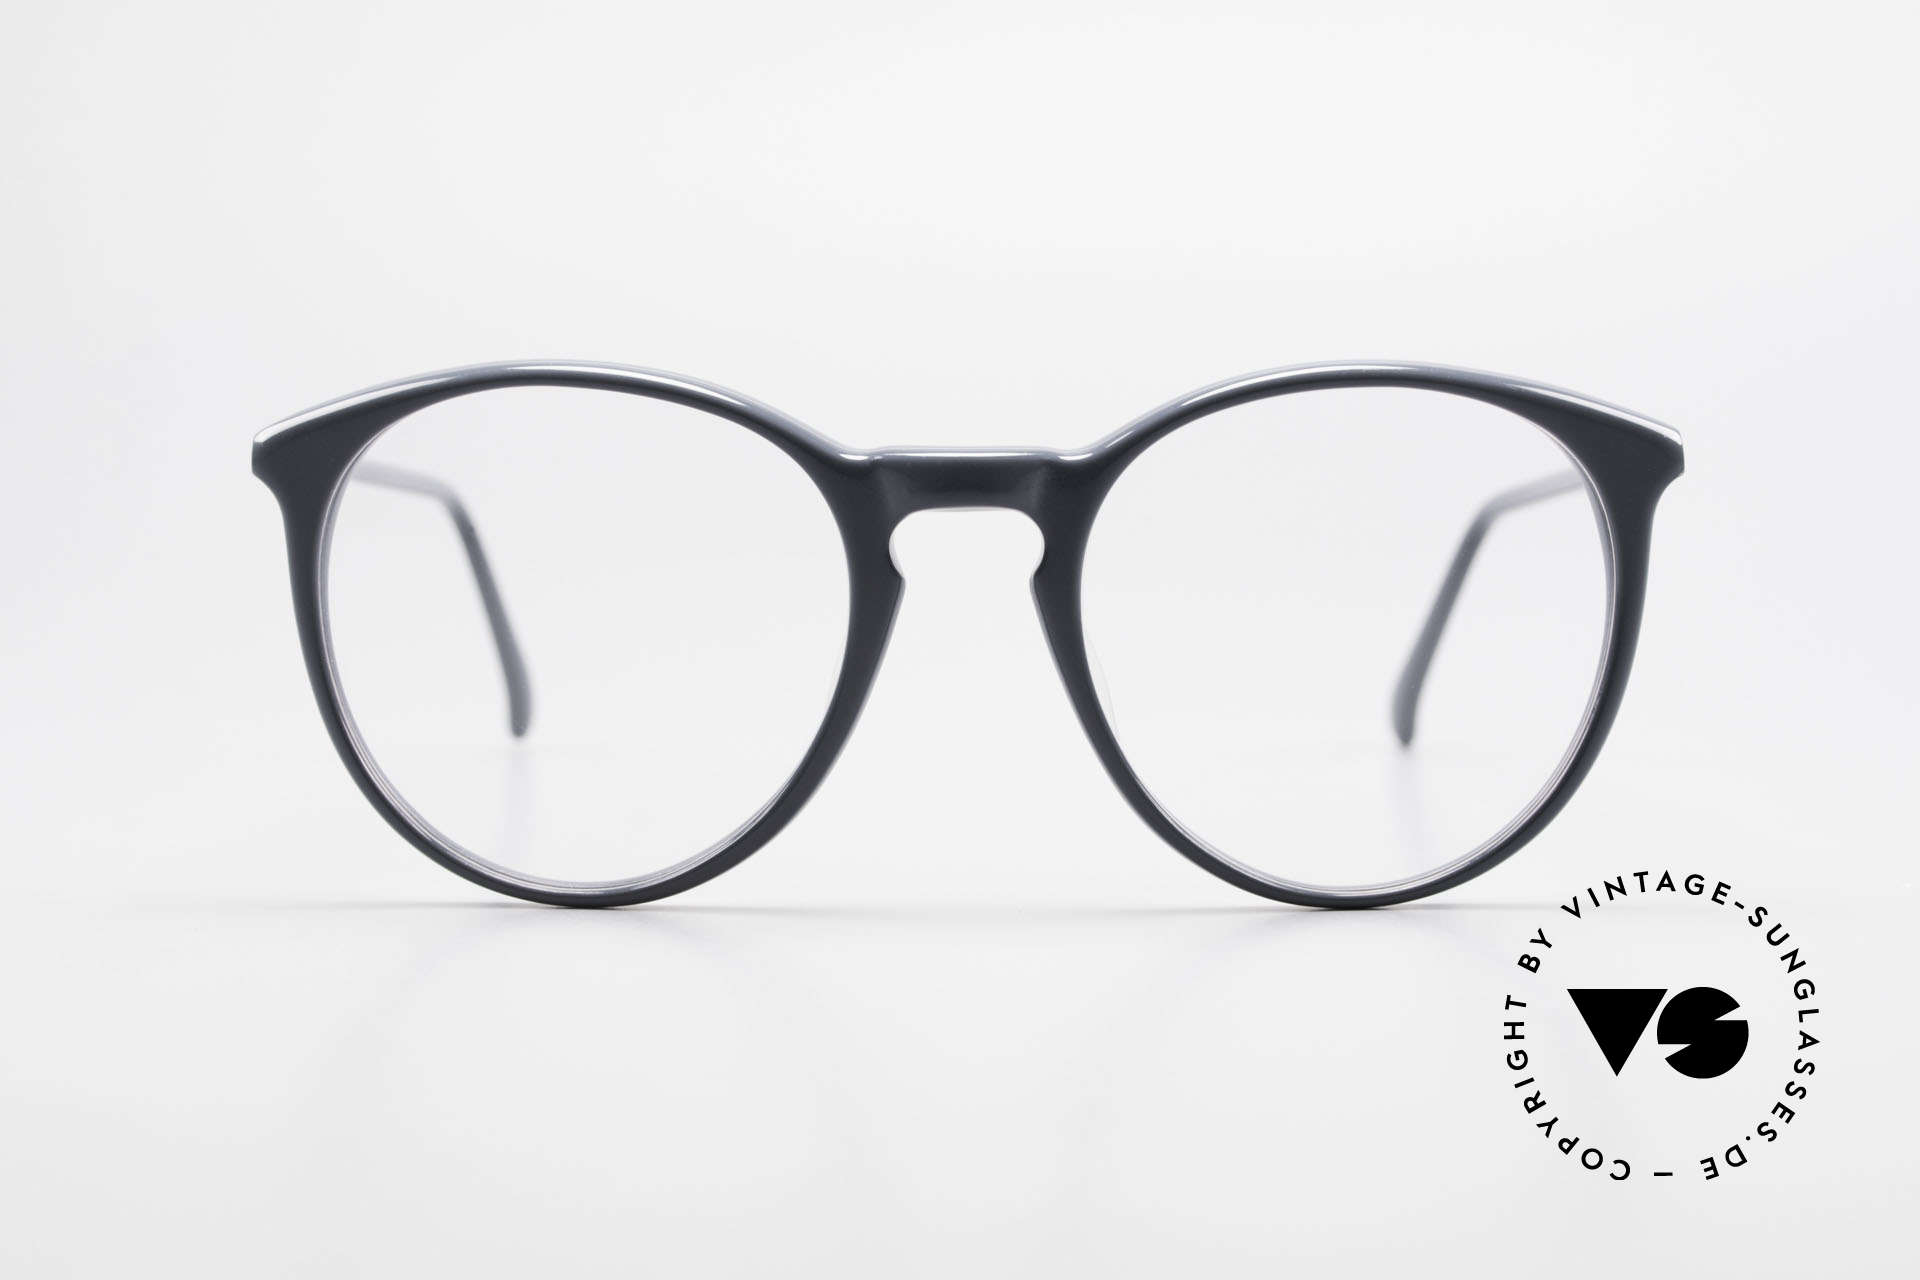 Alain Mikli 901 / 075 No Retro Glasses True Vintage, classic 'panto'-design with timeless gray coloring, Made for Men and Women